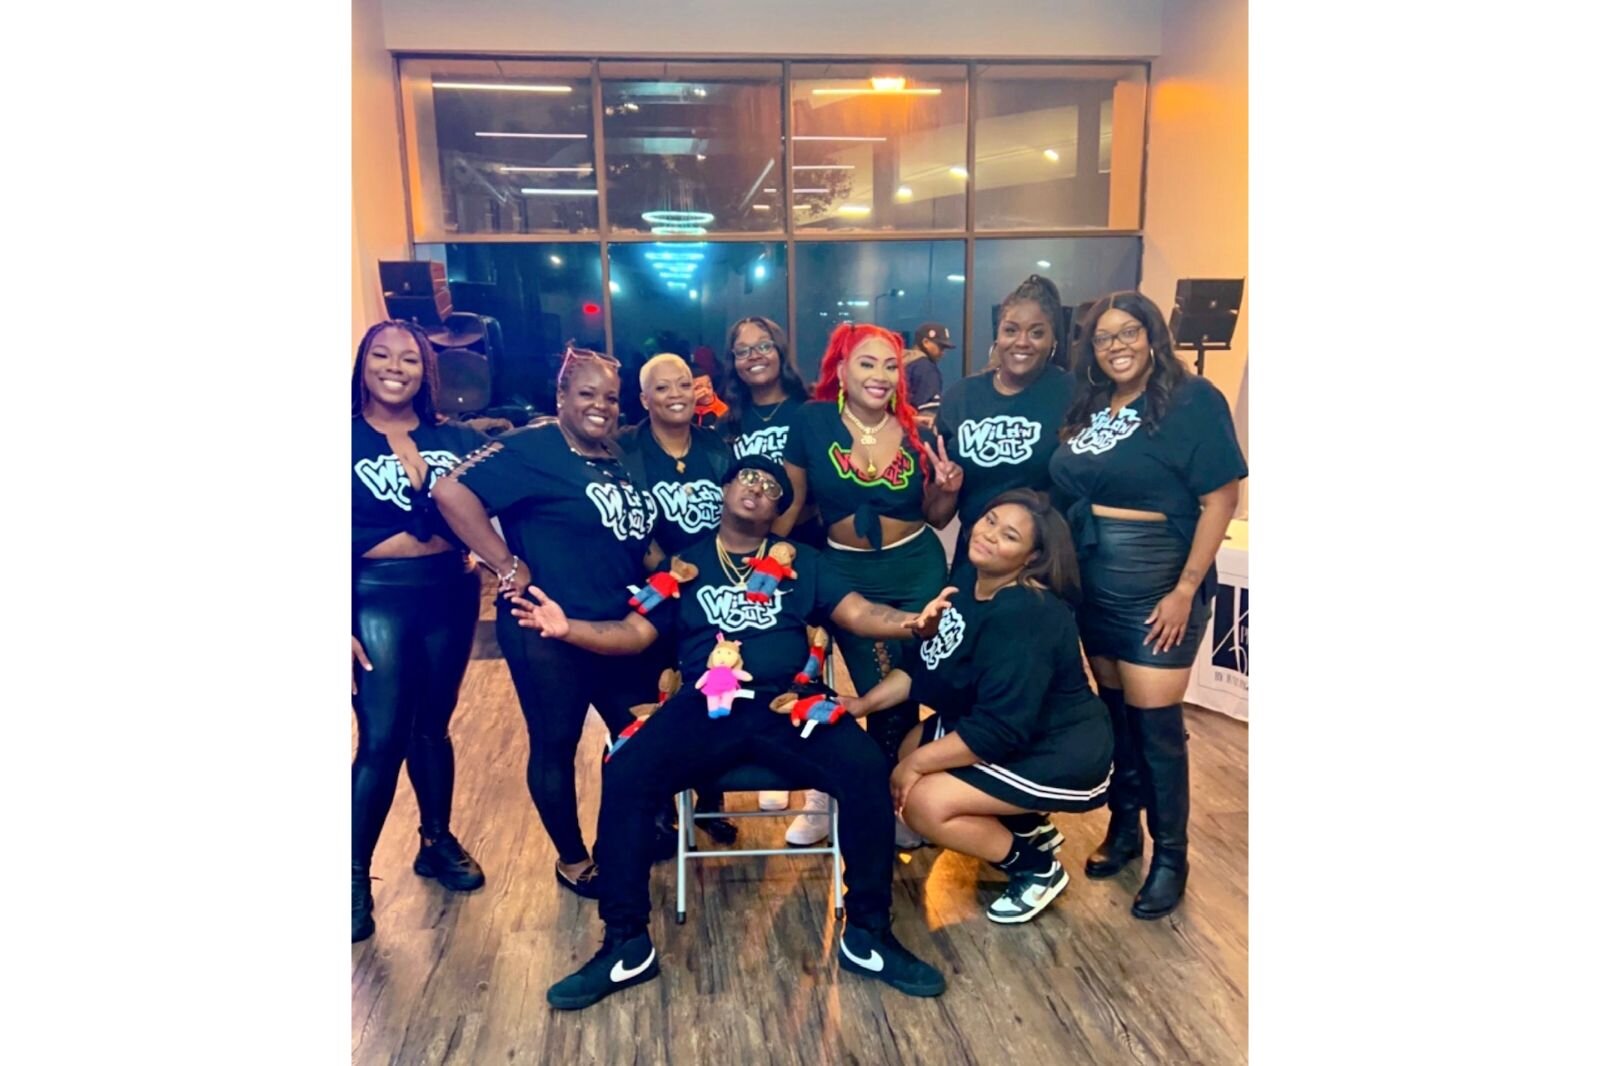 Staff members and friends at The Xperience dress as cast members of the 'Wild N Out" TV show for an Oct. 30 Halloween party at the venue.